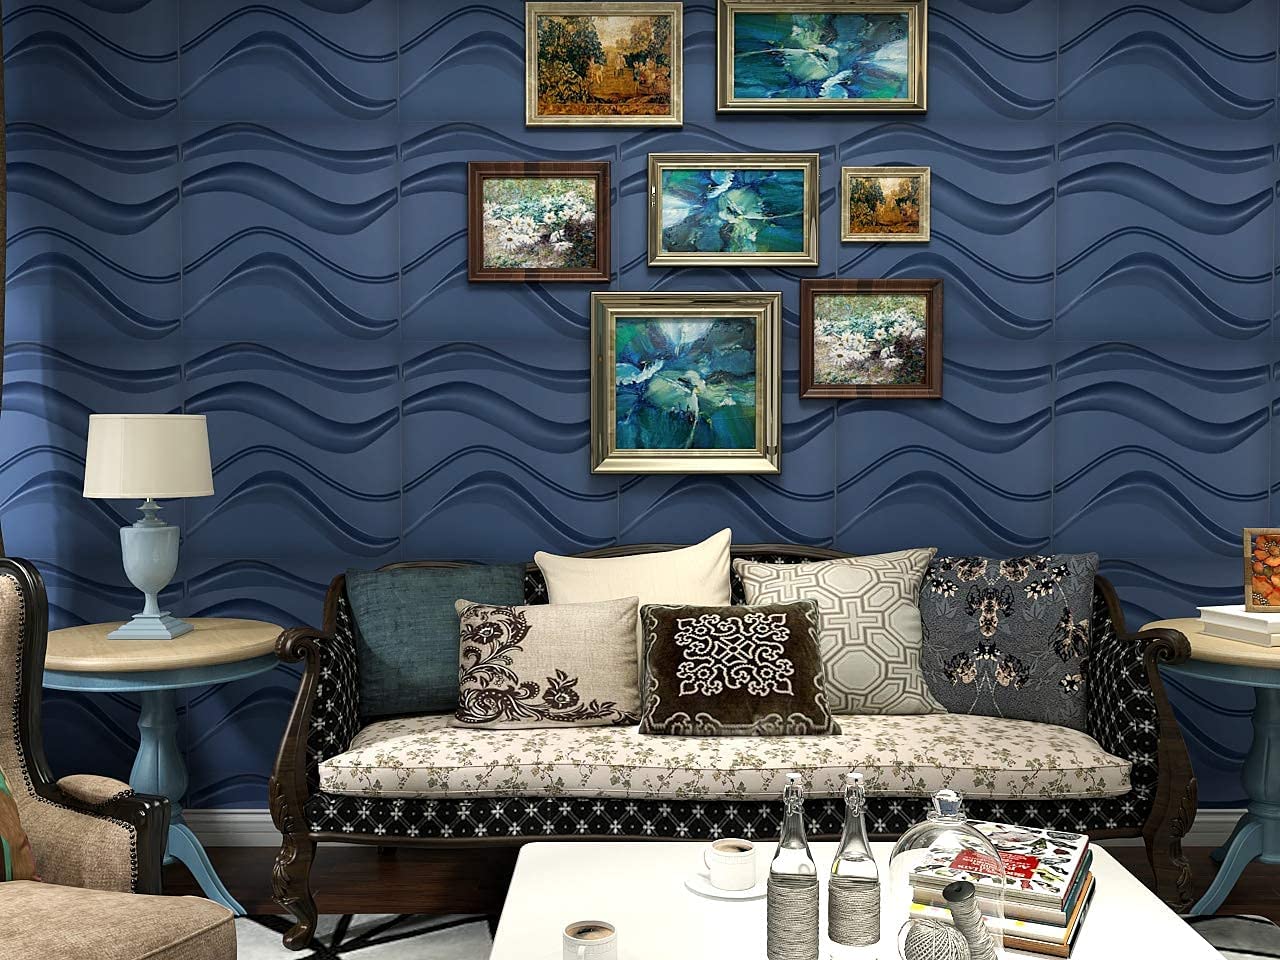 A10003 - 3D Textured Wall Panels for Interior Room Wall Decor 12 Tiles 32.29 sq.ft